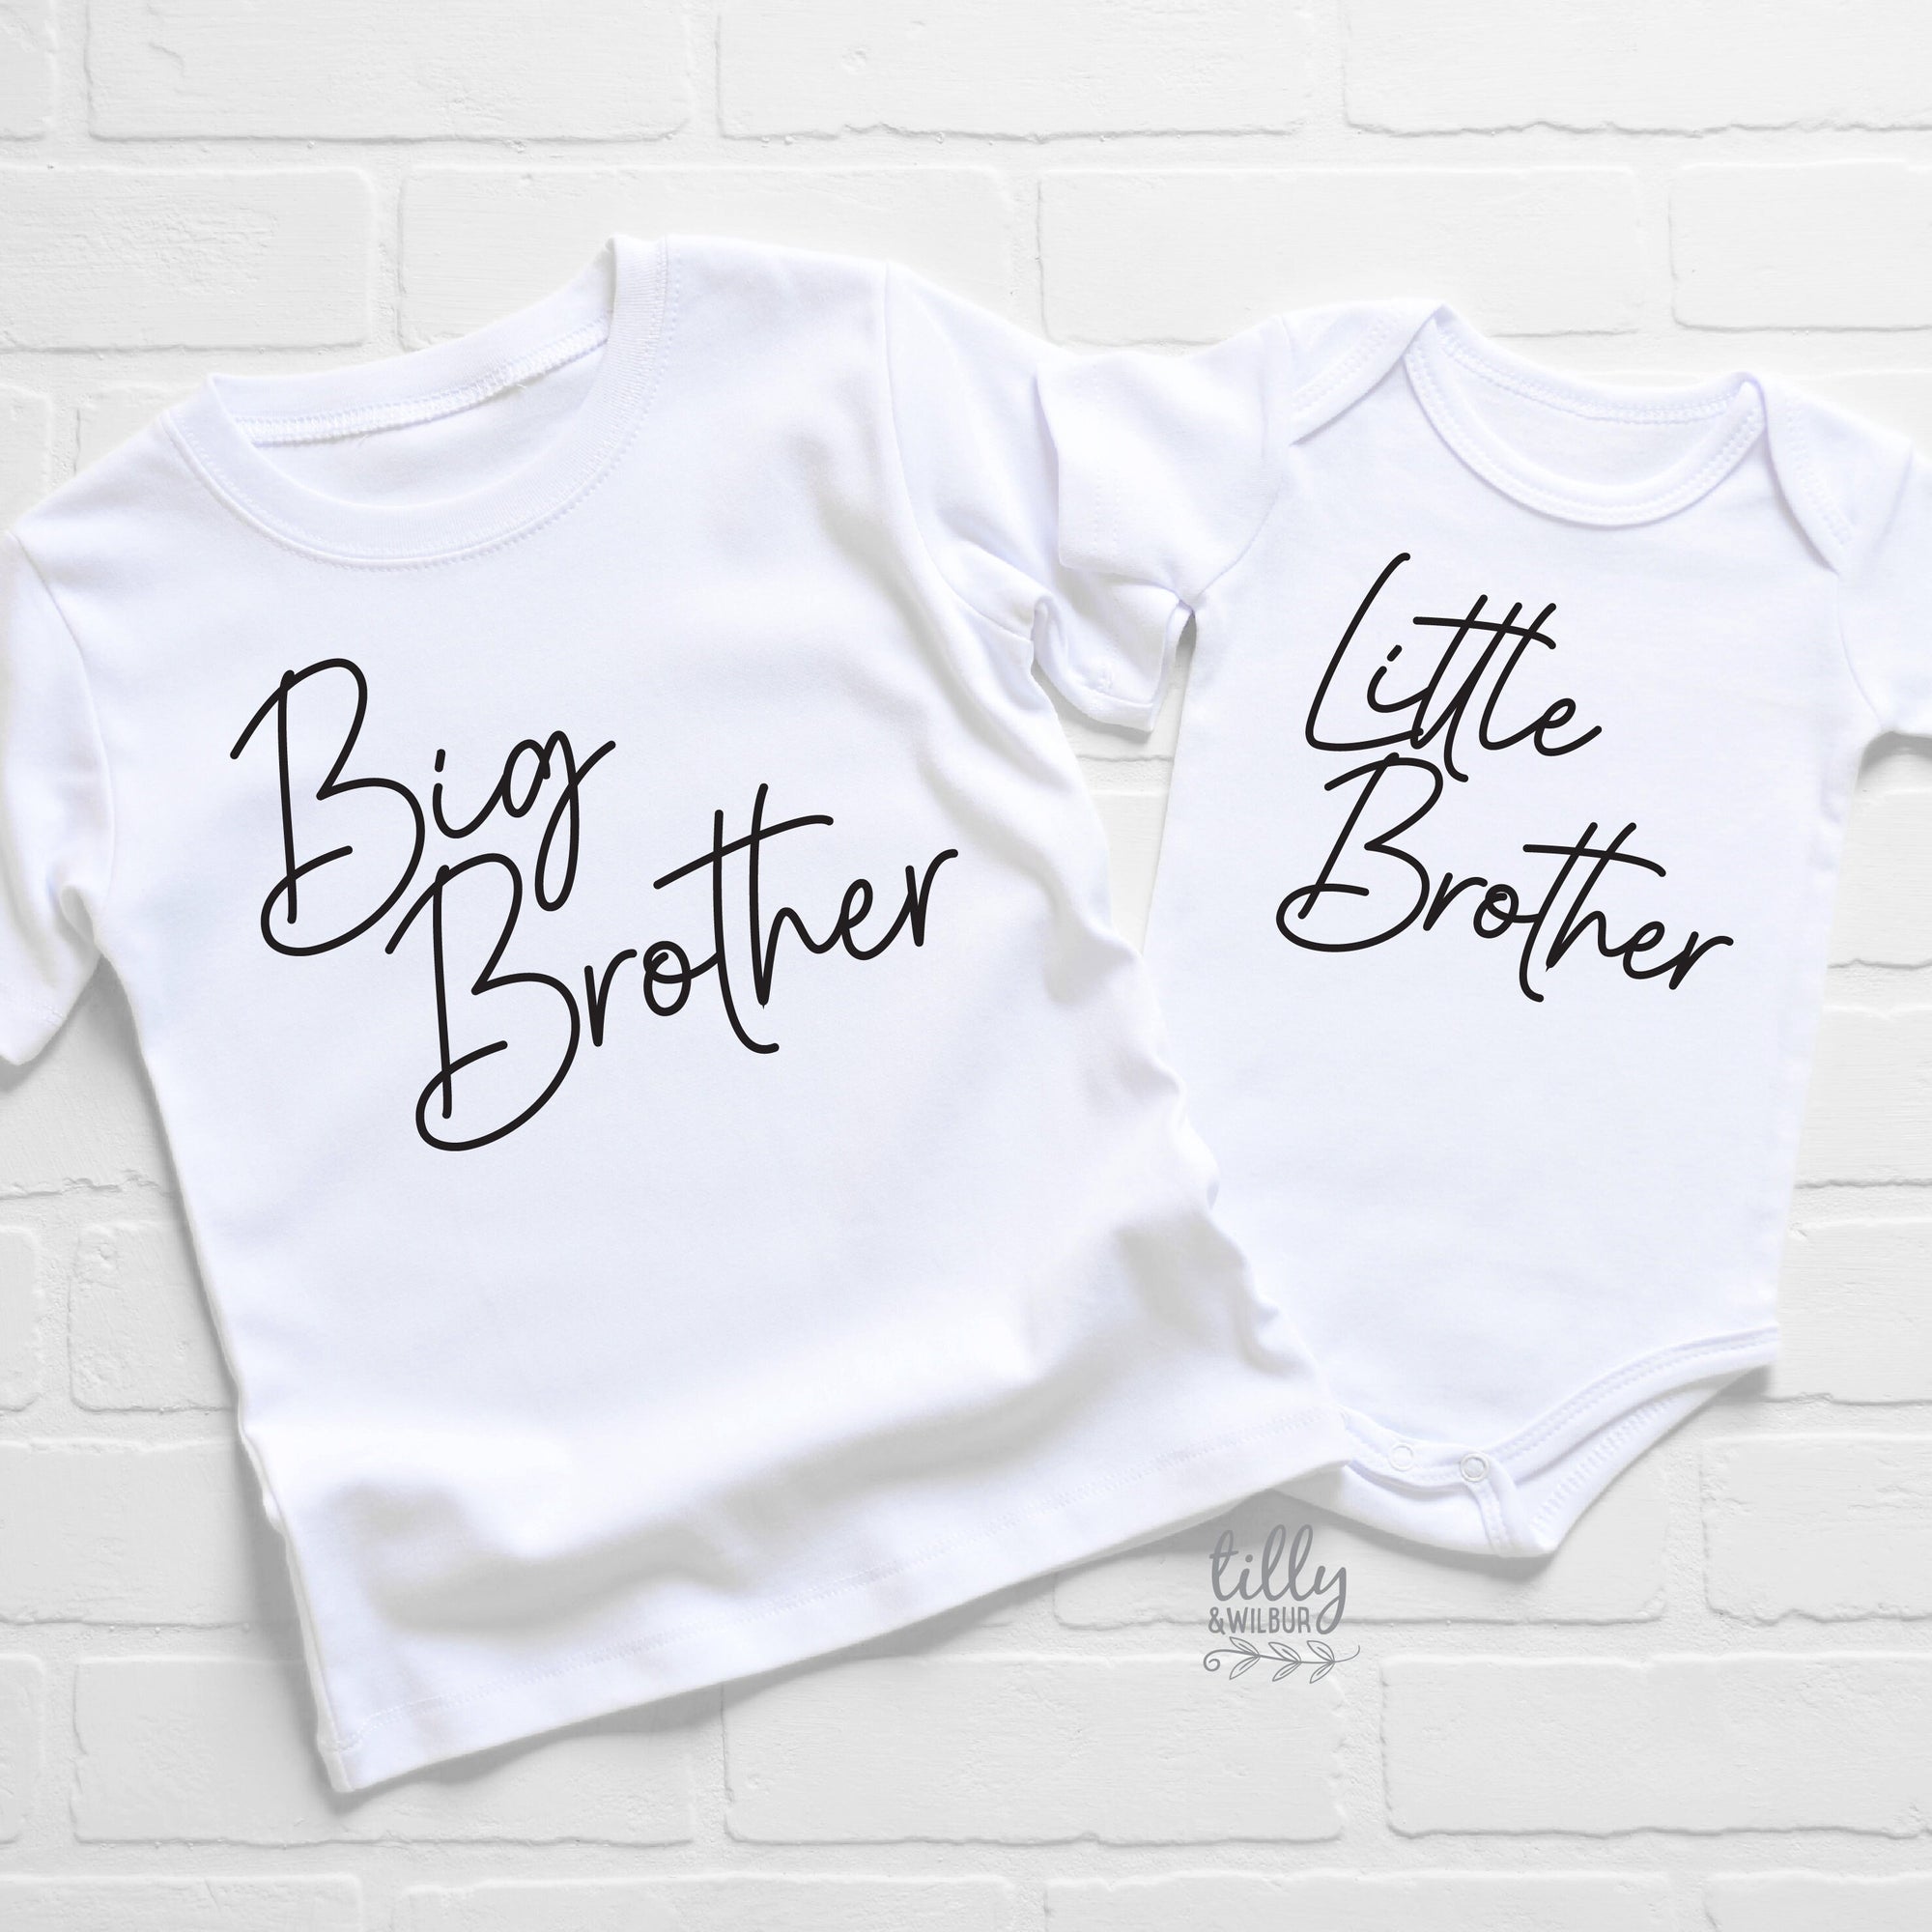 Big Brother Little Brother Matching Set, Big Bro Little Bro Set, Matching Brother Outfits, Matching Sibling Shirts, Pregnancy Announcement